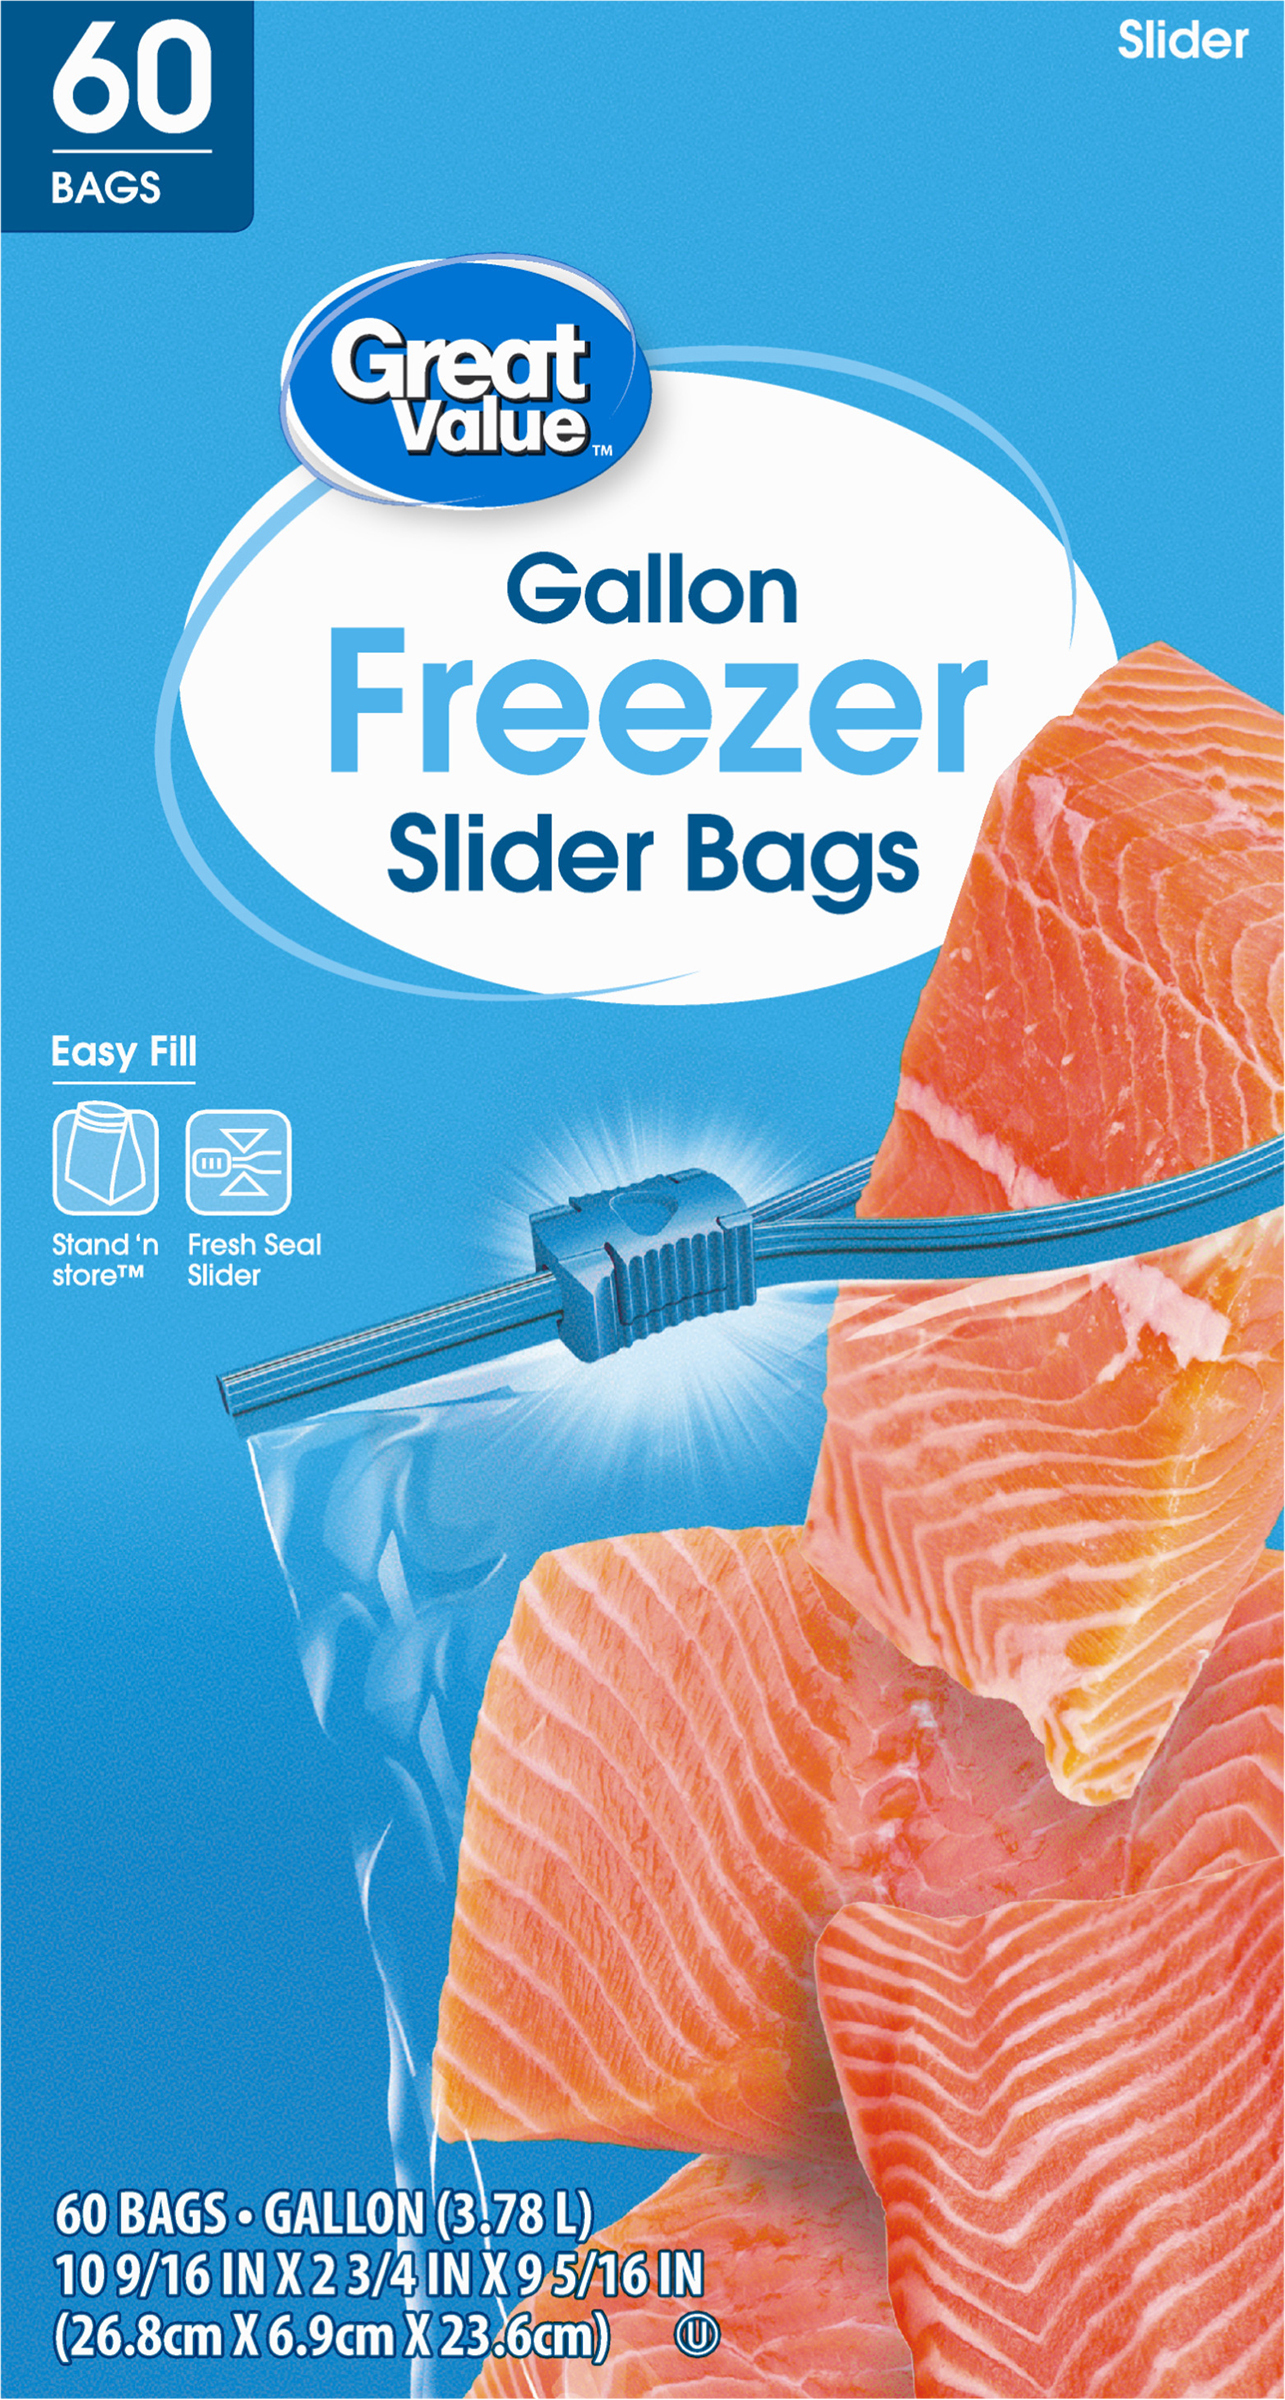 Great Value Gallon Freezer Guard Slider Zipper Bags, 60 Count - image 1 of 7